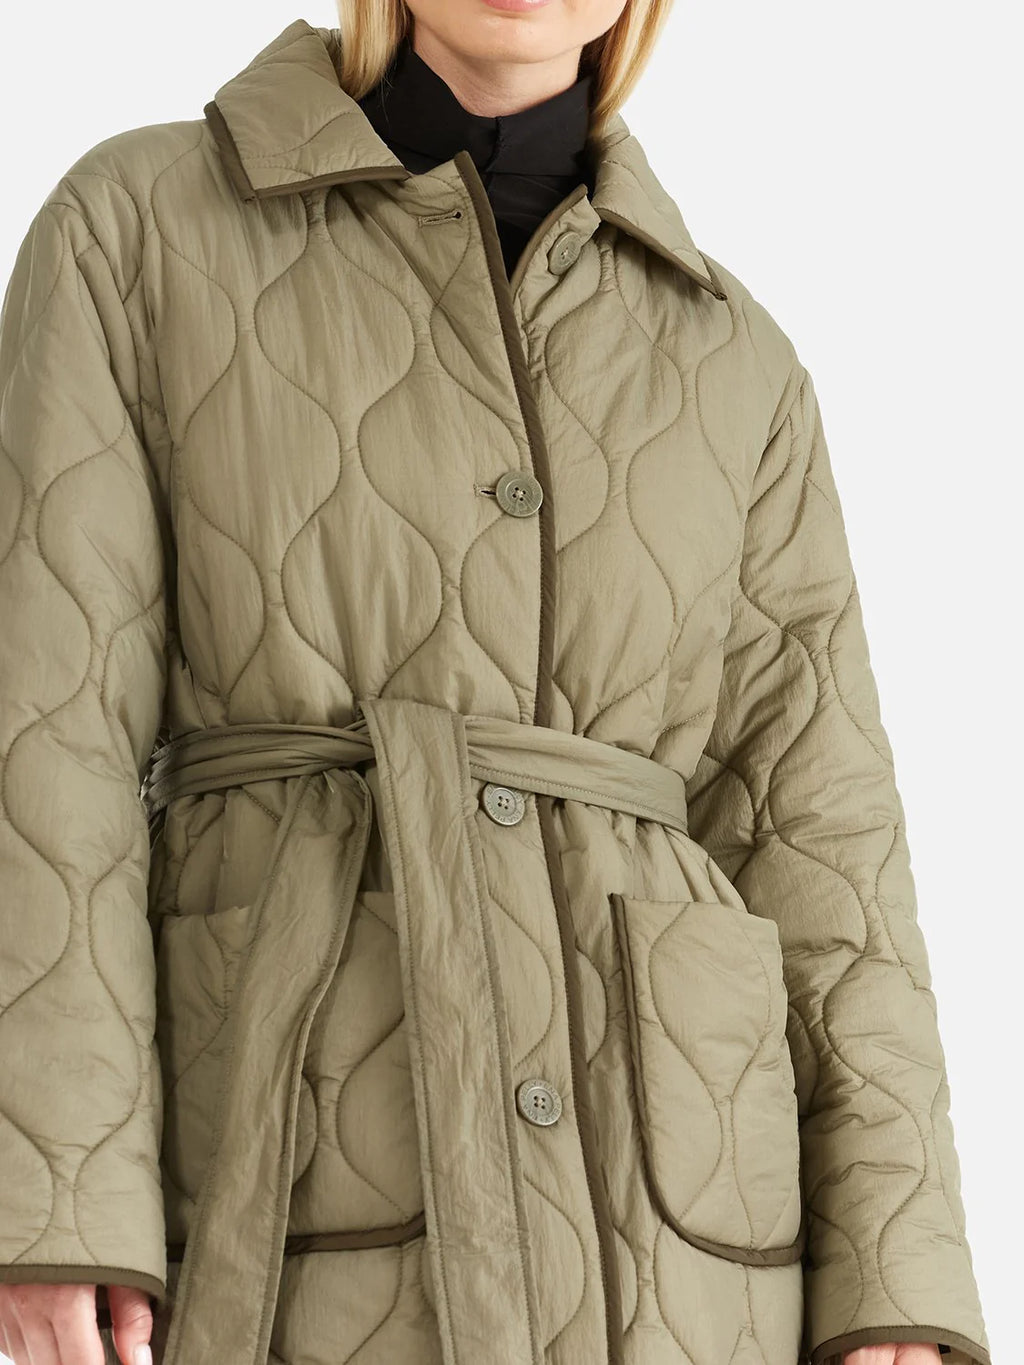 ENA PELLY - Louise Quilted Puffer Jacket - Hunter Green